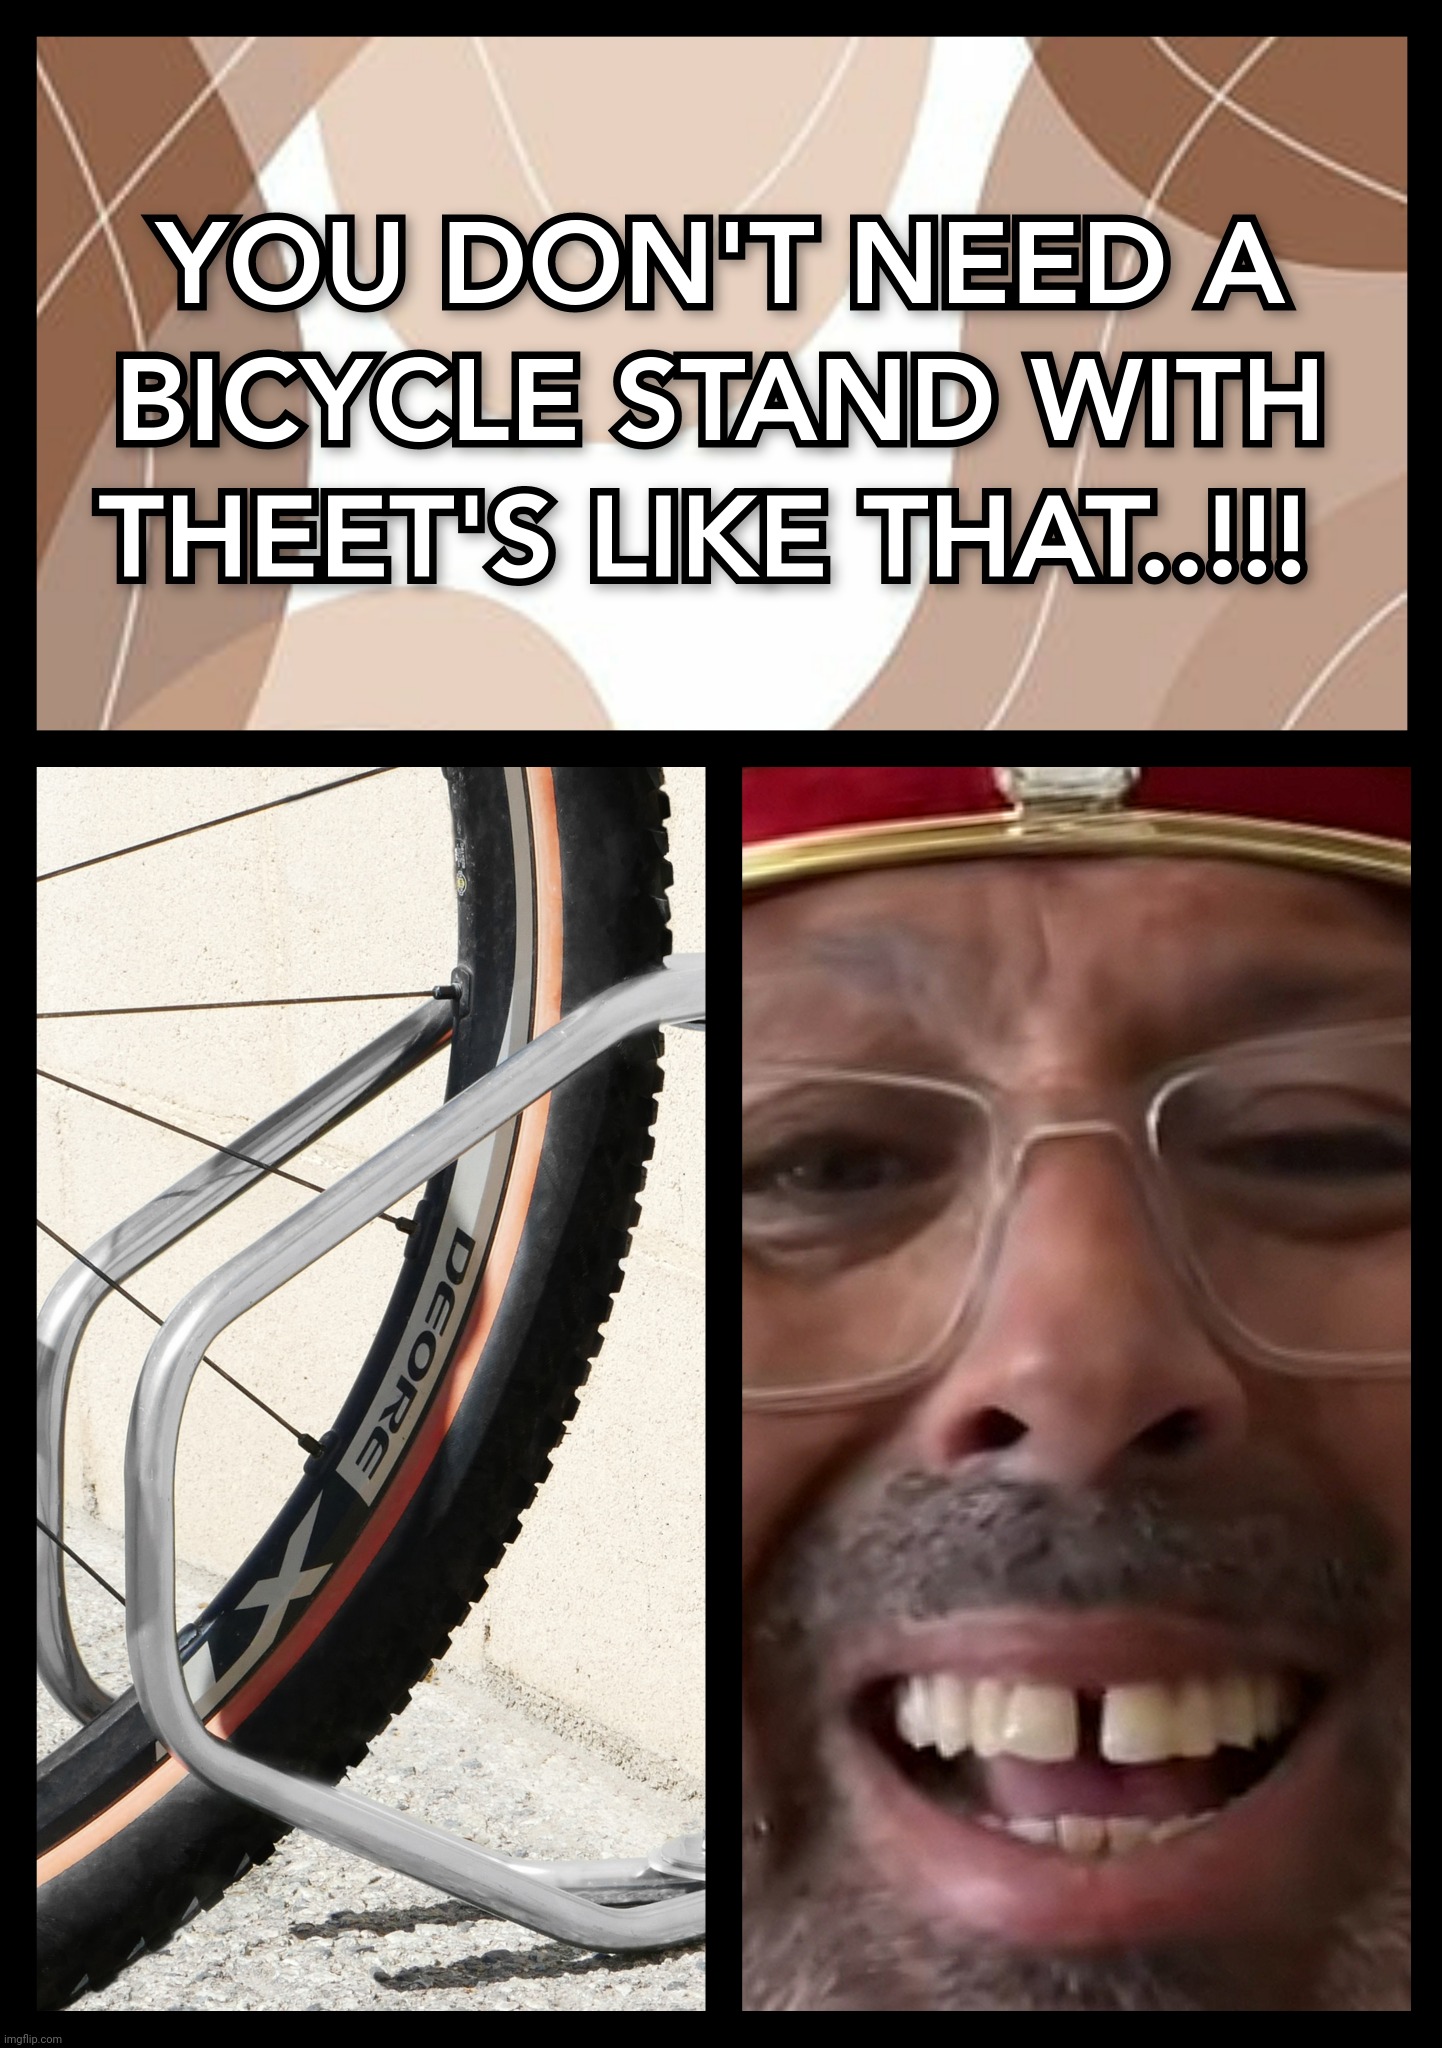 YOU DON'T NEED A BICYCLE STAND WITH THEET'S LIKE THAT..!!! | image tagged in bicycle,funny memes,funny,memes,gifs,tiktok | made w/ Imgflip meme maker